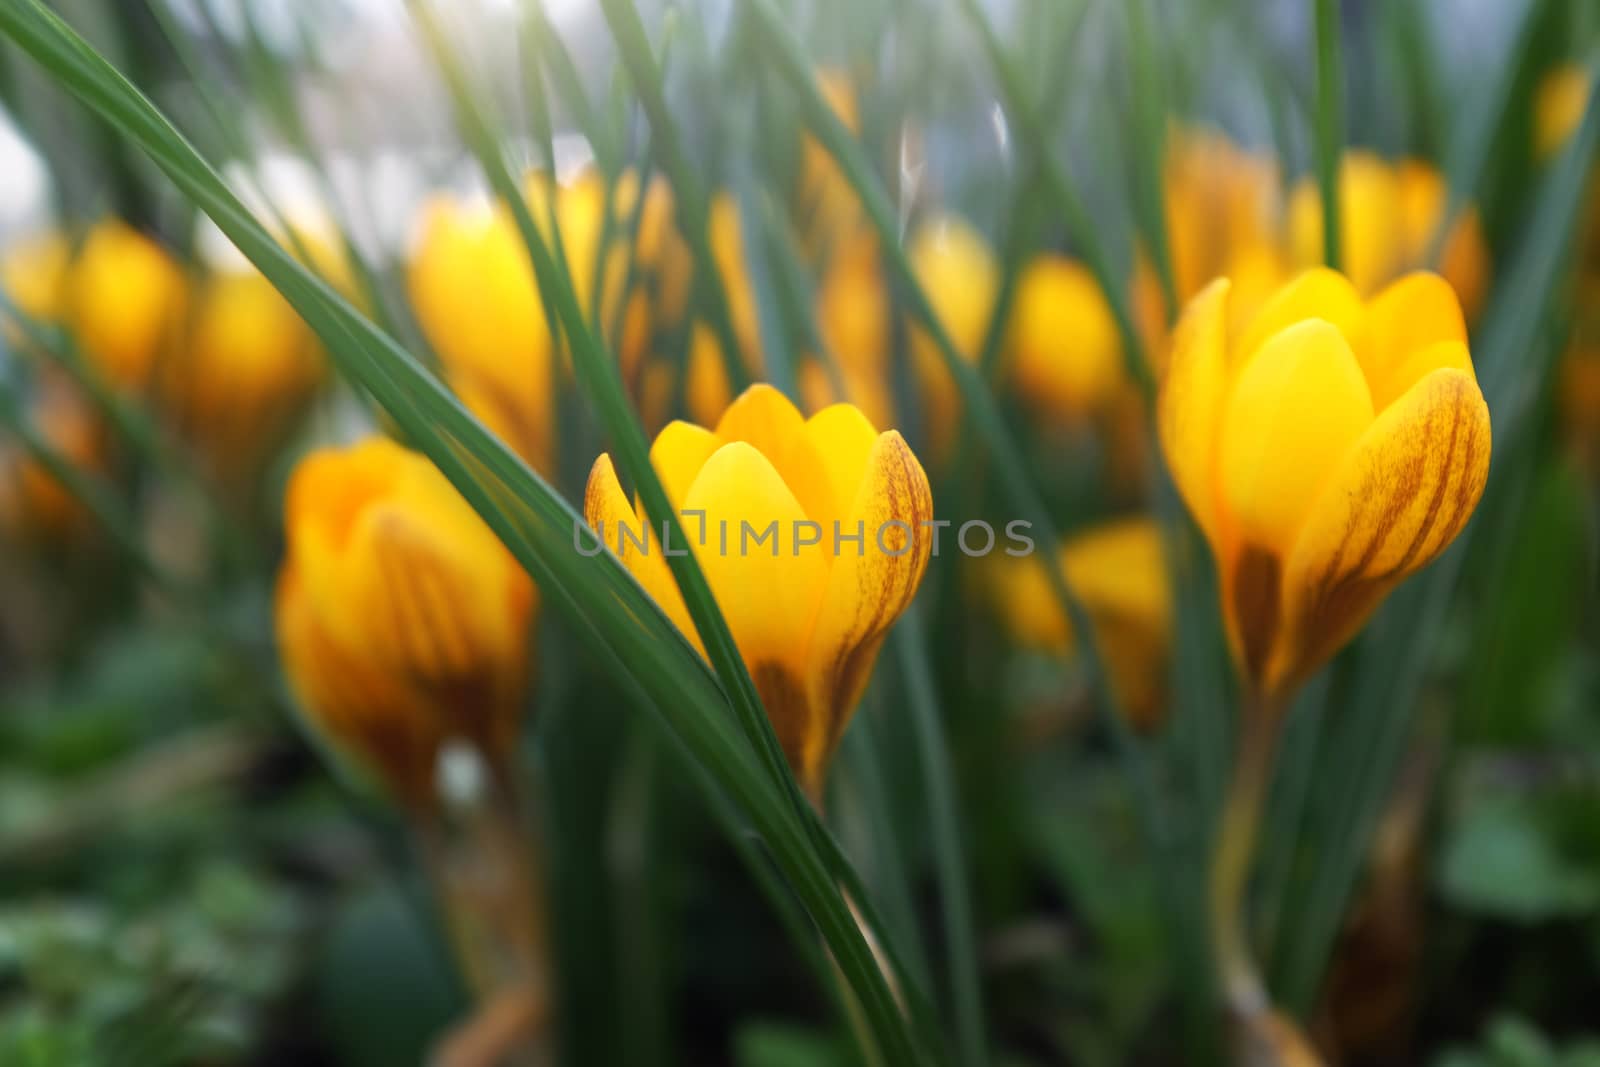 Low profile of yellow crocus flower in shallow focus among foliage and other flowers